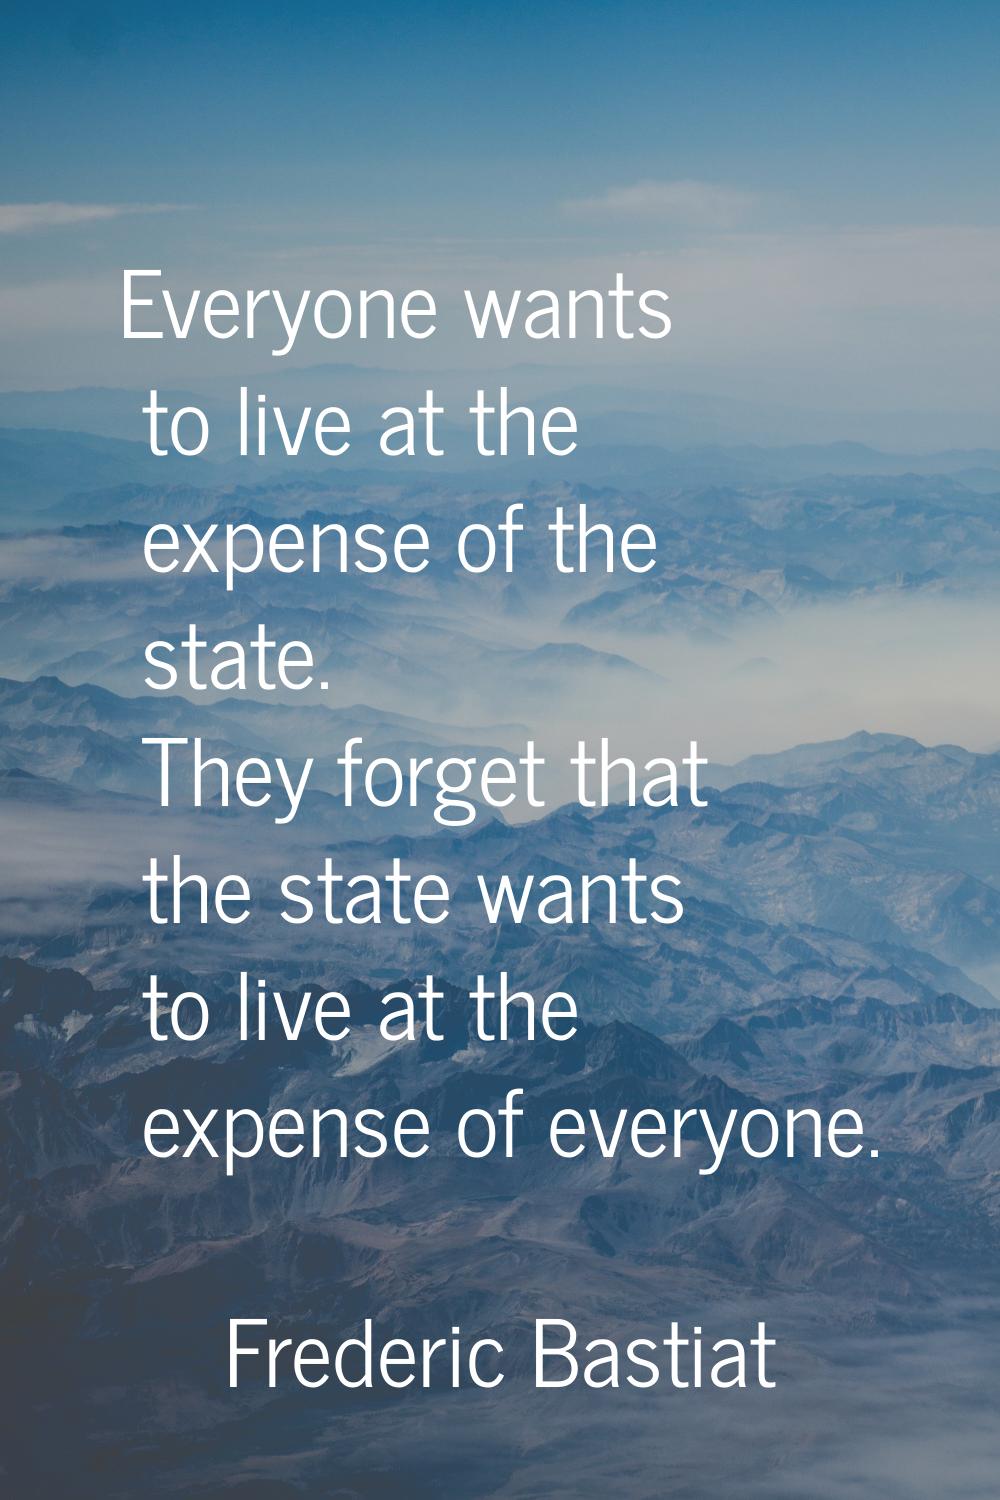 Everyone wants to live at the expense of the state. They forget that the state wants to live at the